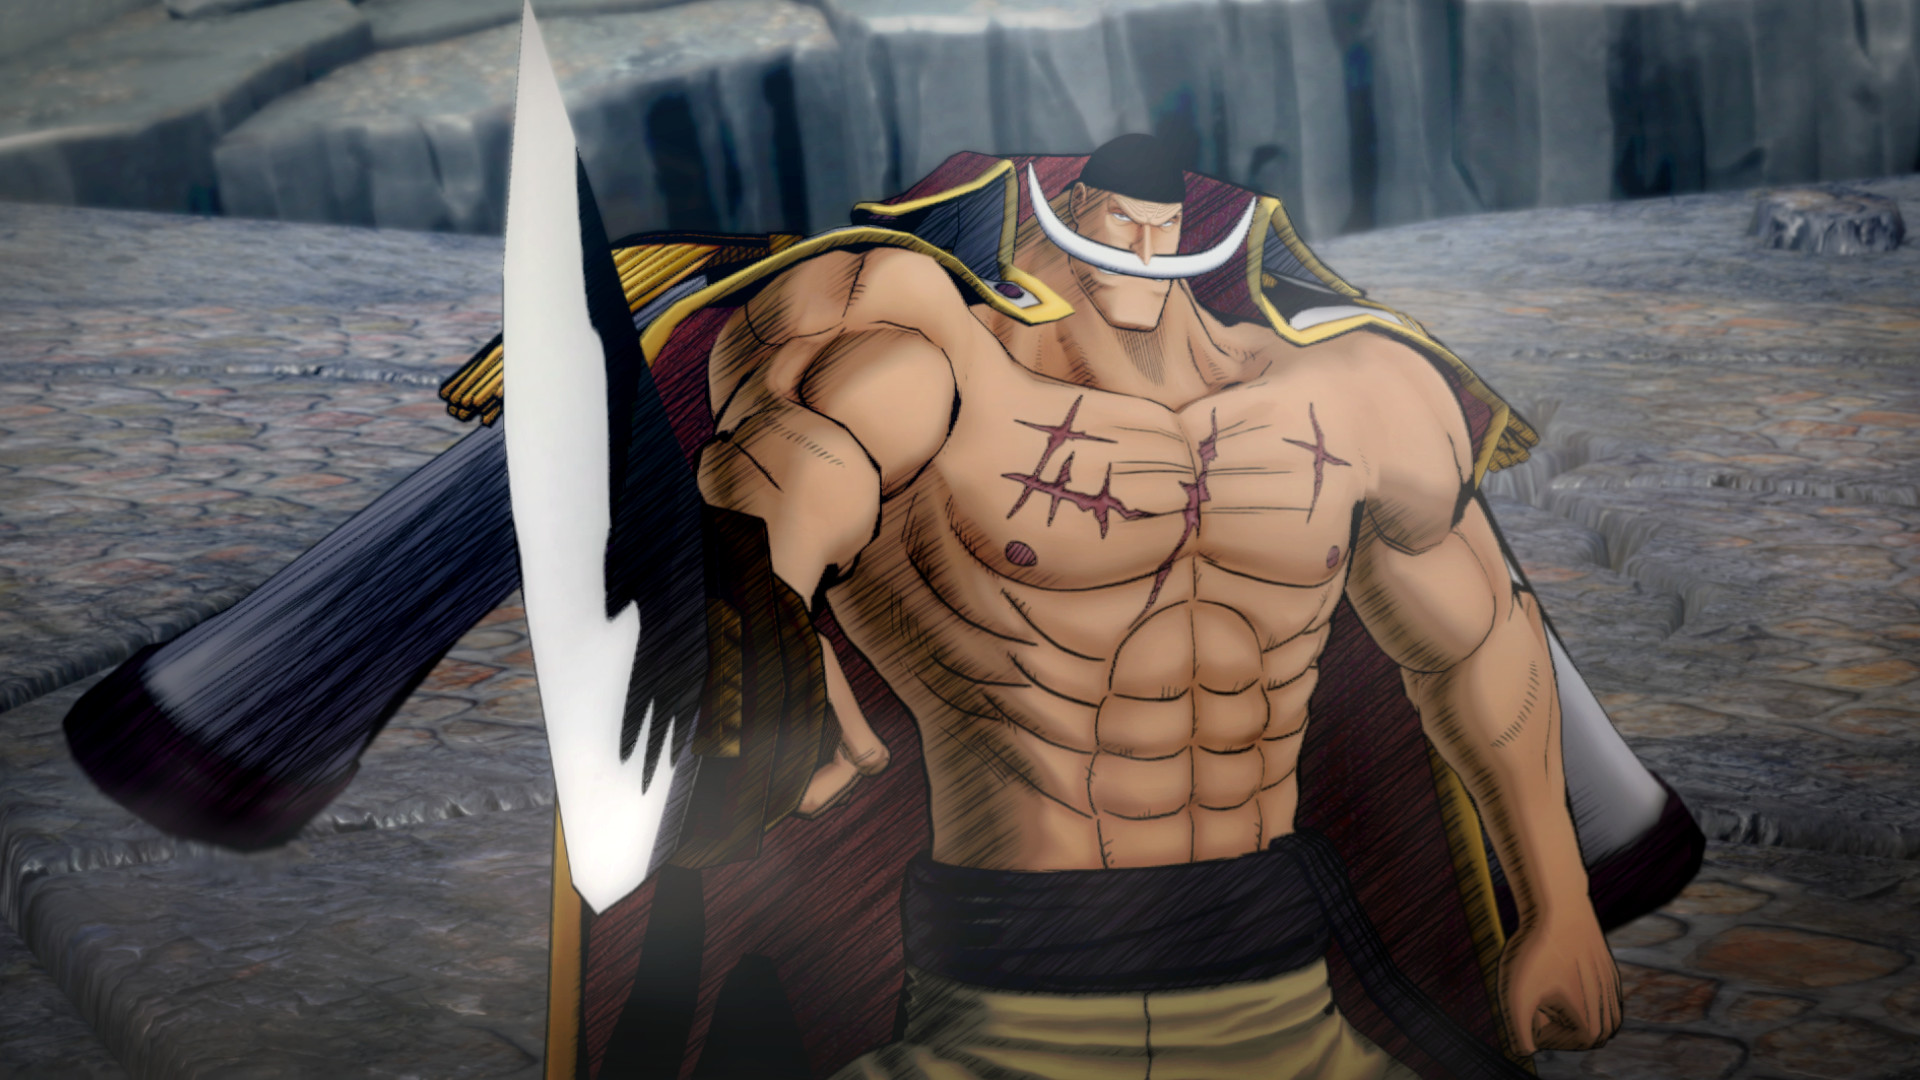 whitebeard wallpaper,muscle,chest,arm,barechested,fictional character